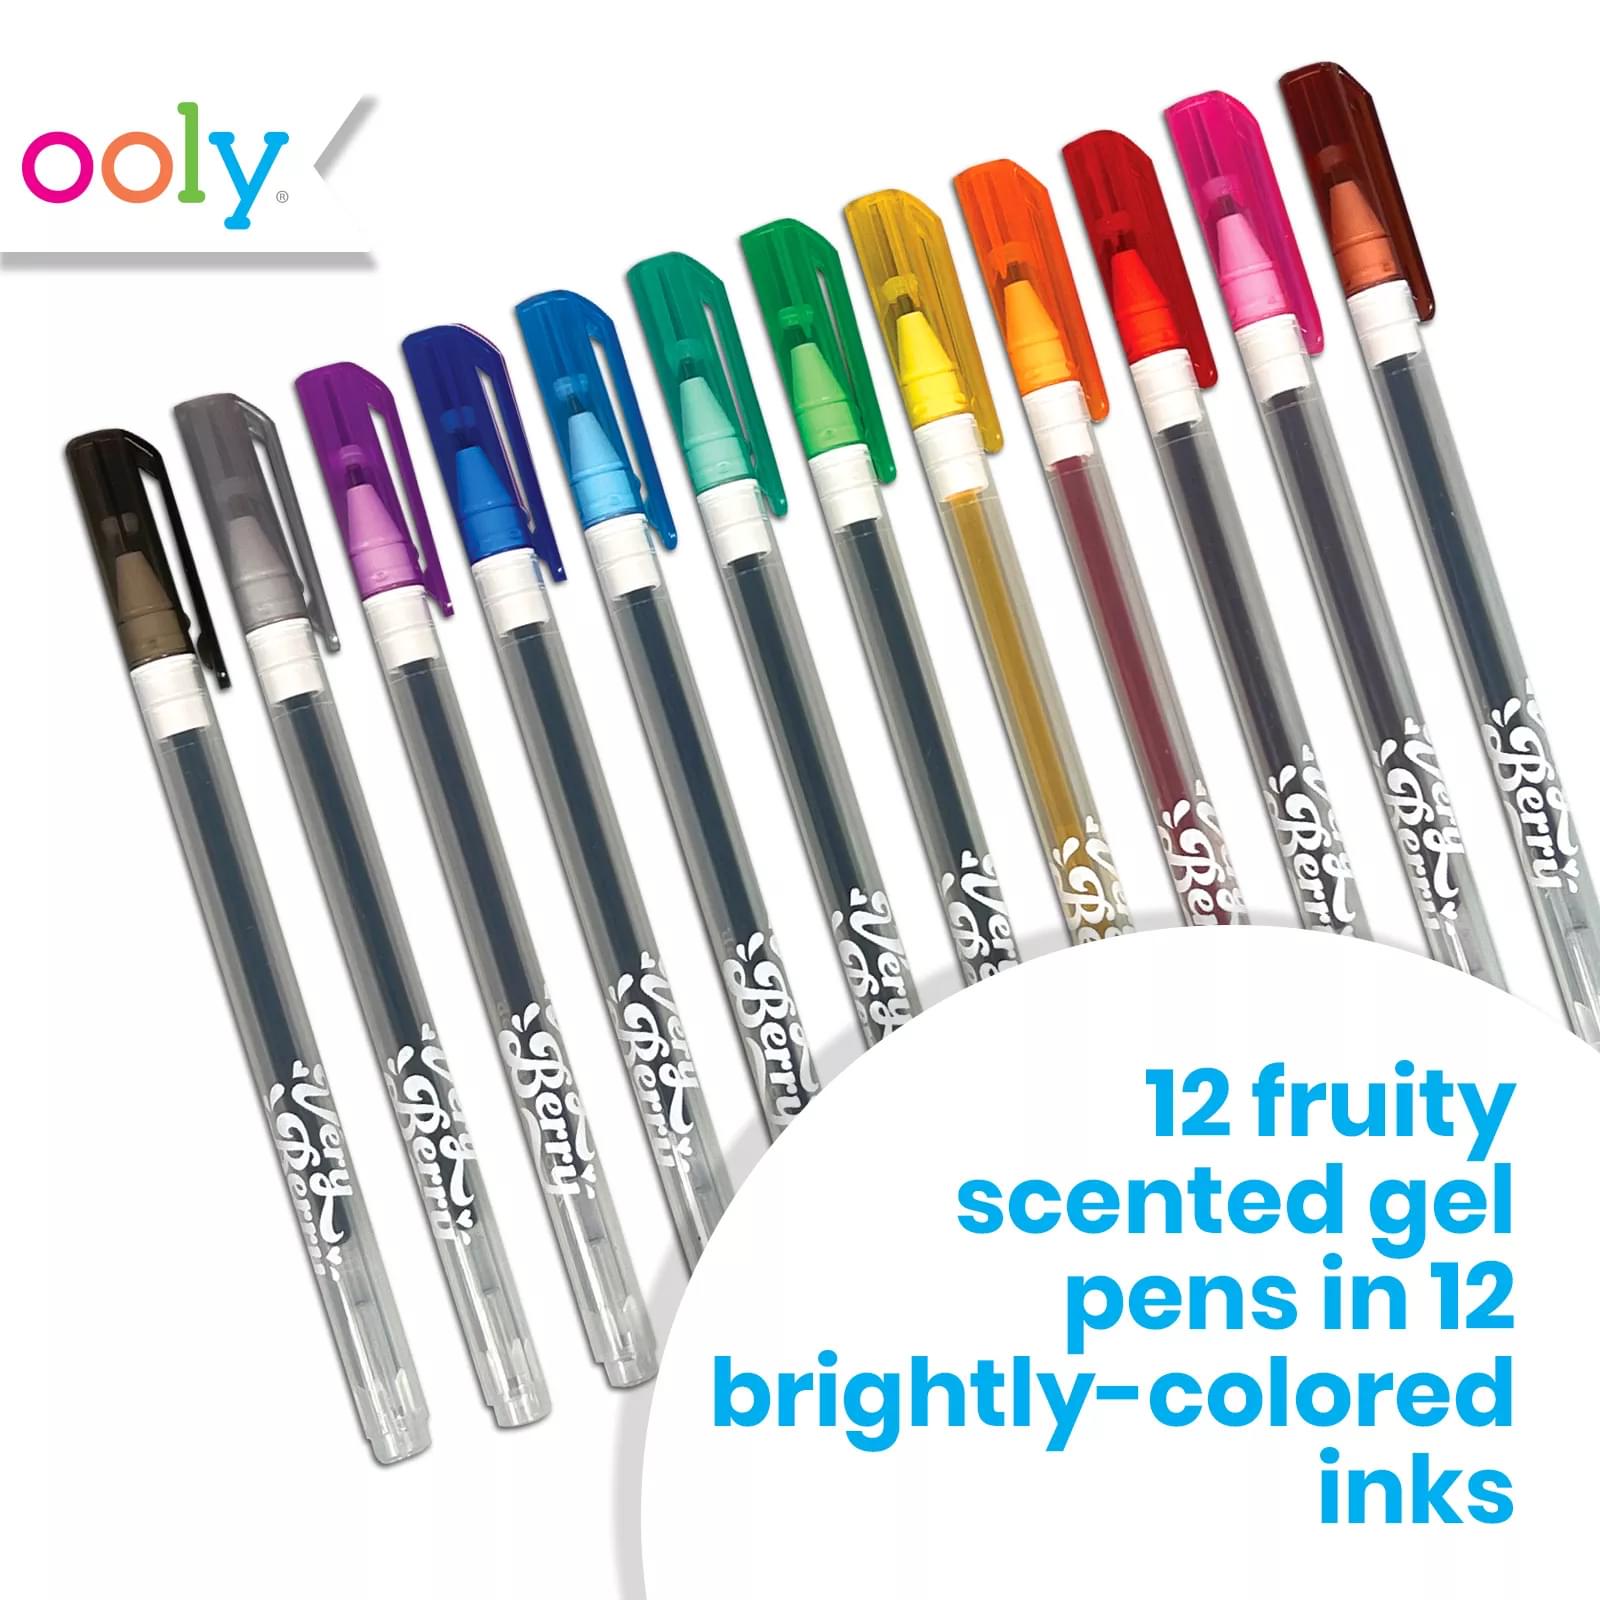 Very Berry Strawberry Scented Gel Pens - Set of 12